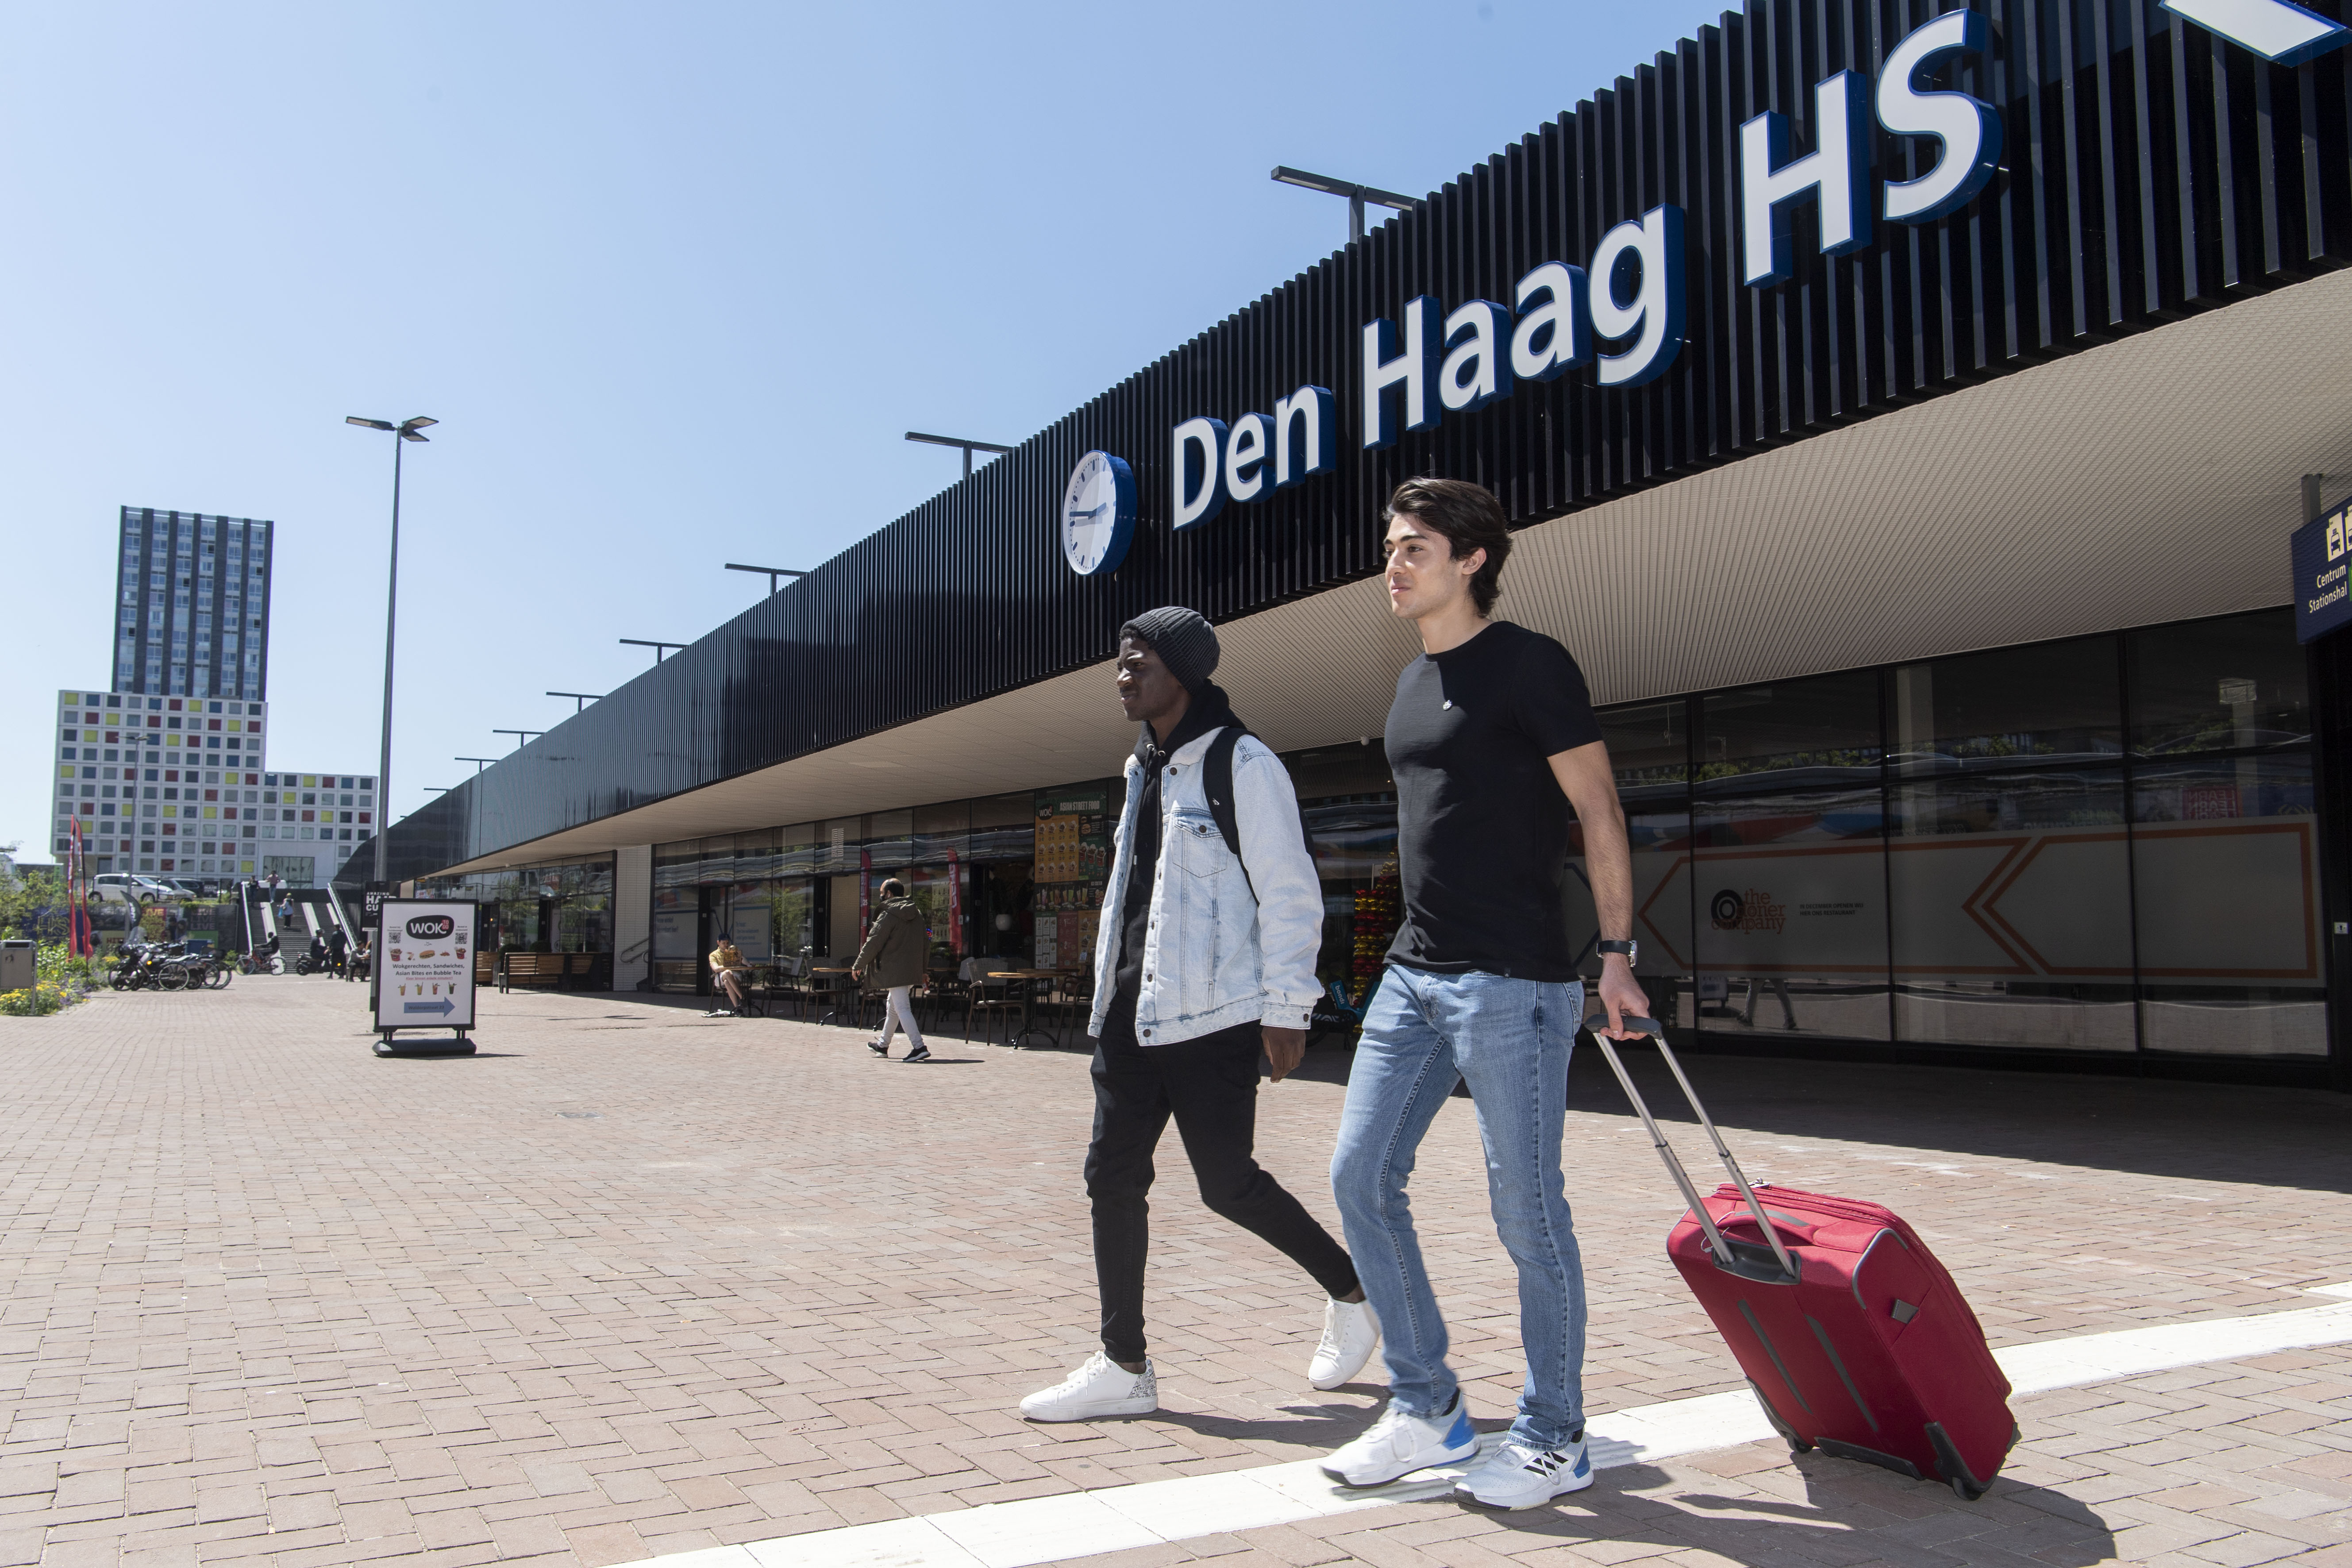 Getting to the Hague from Schiphol aiport 